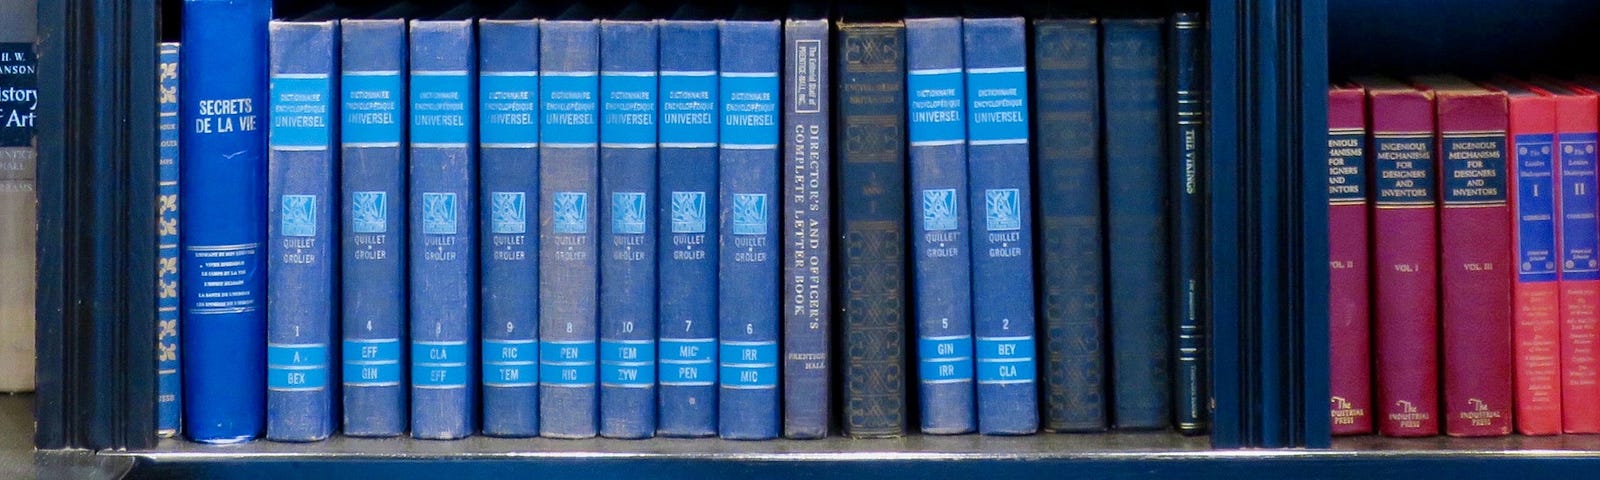 Row of older books, with covers in Blue, Red and Pink.